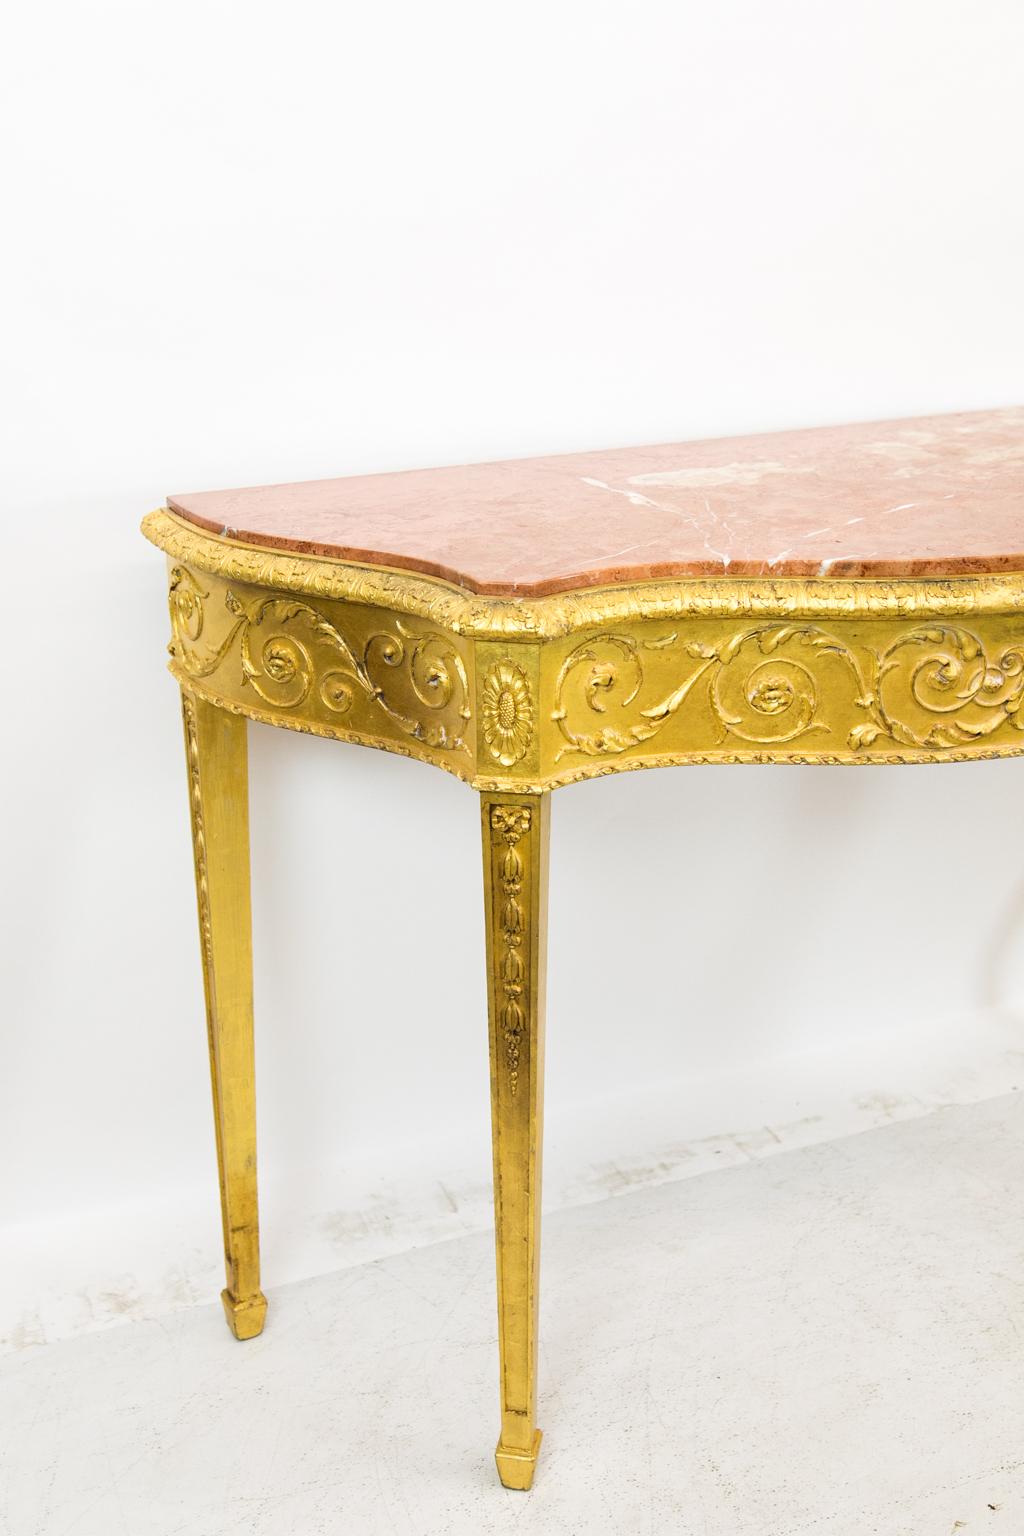 Serpentine English Marble-Top Gilt Console Table In Good Condition For Sale In Wilson, NC